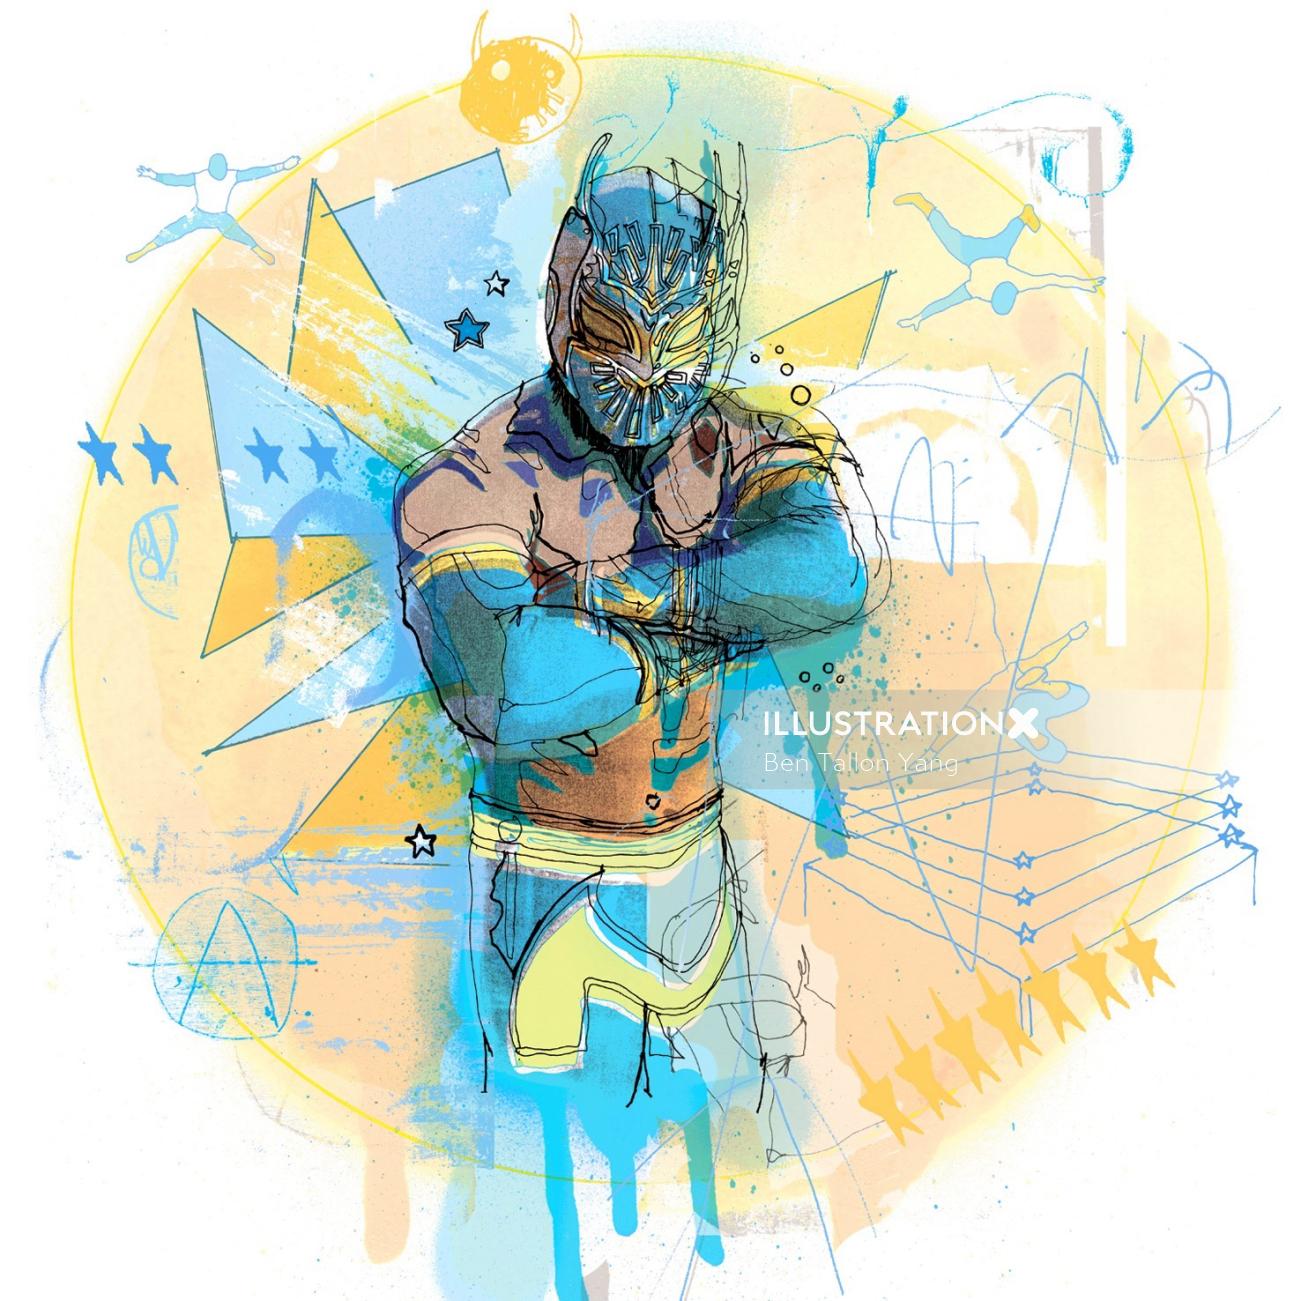 Sin Cara, an American professional wrestler, is drawn in pen and ink